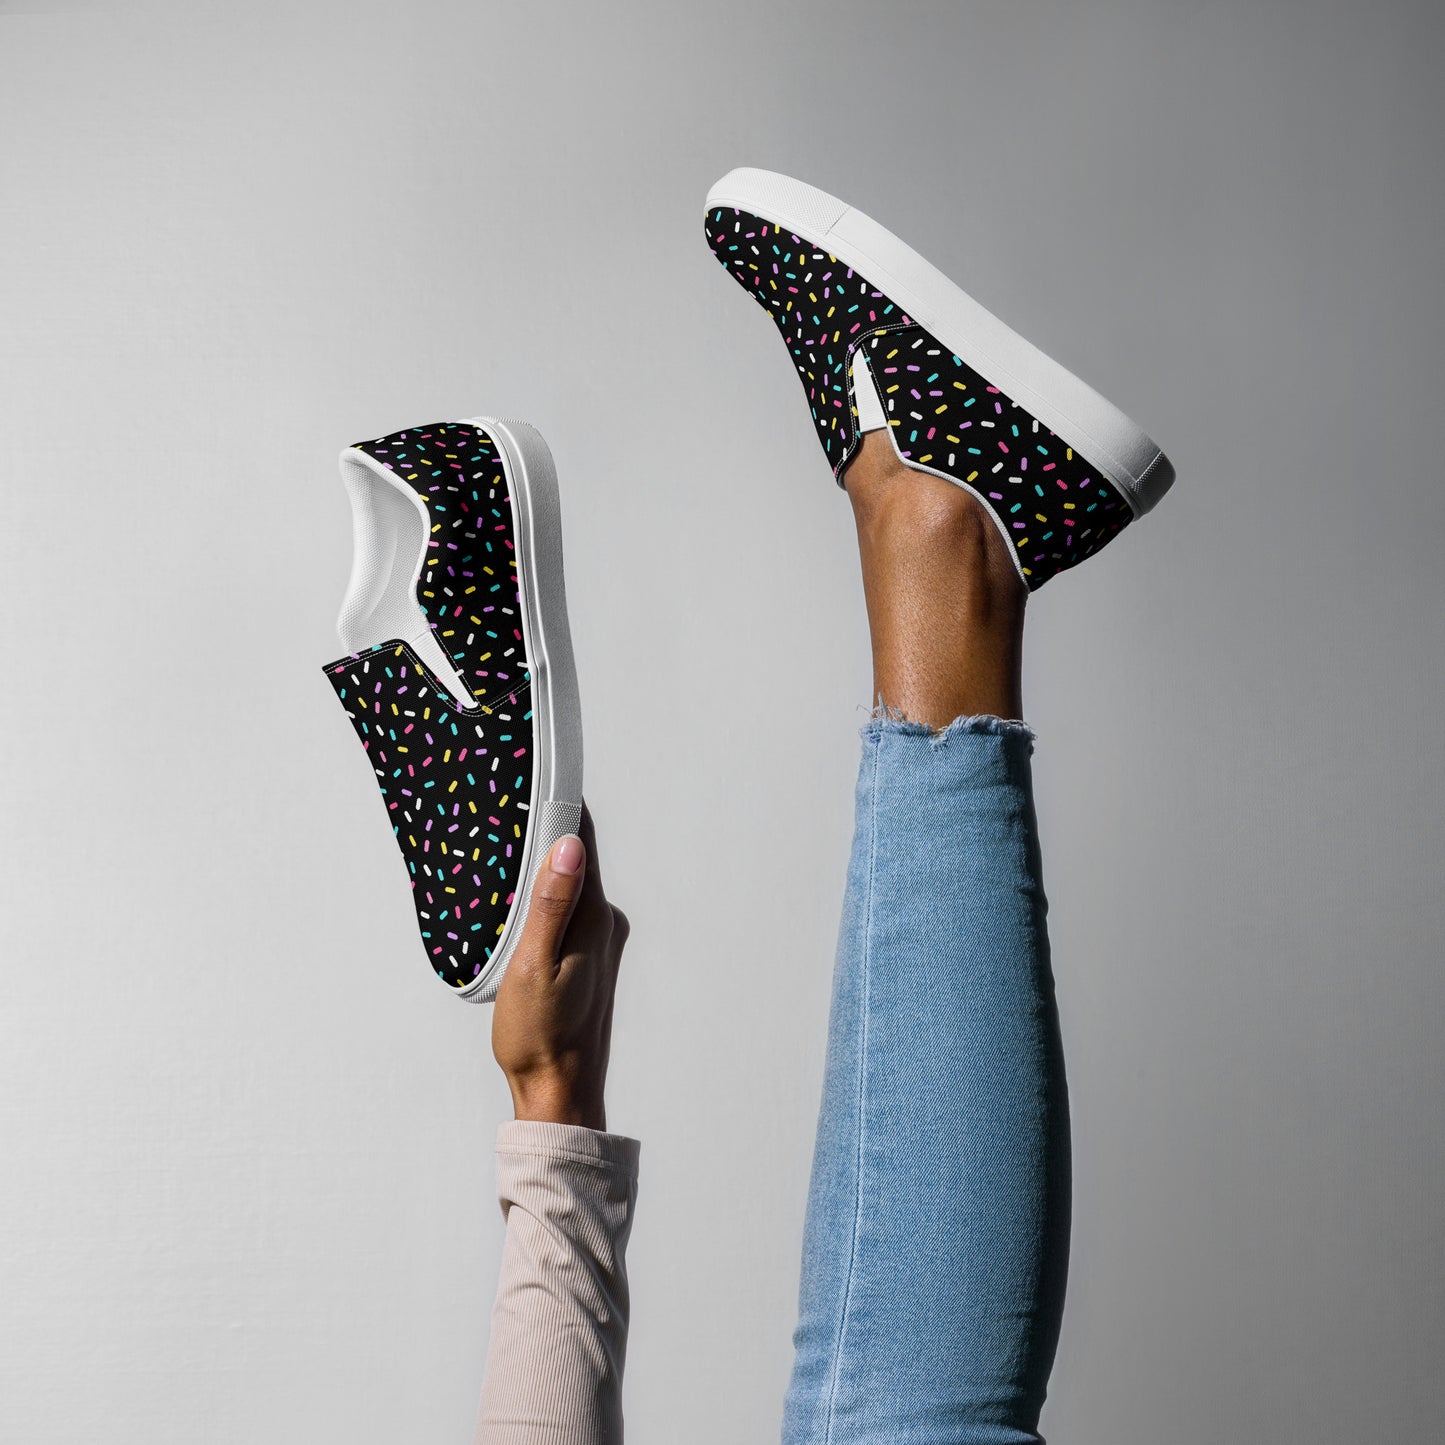 Sprinkled with Love - Women’s Slip-on Canvas Shoes in Black